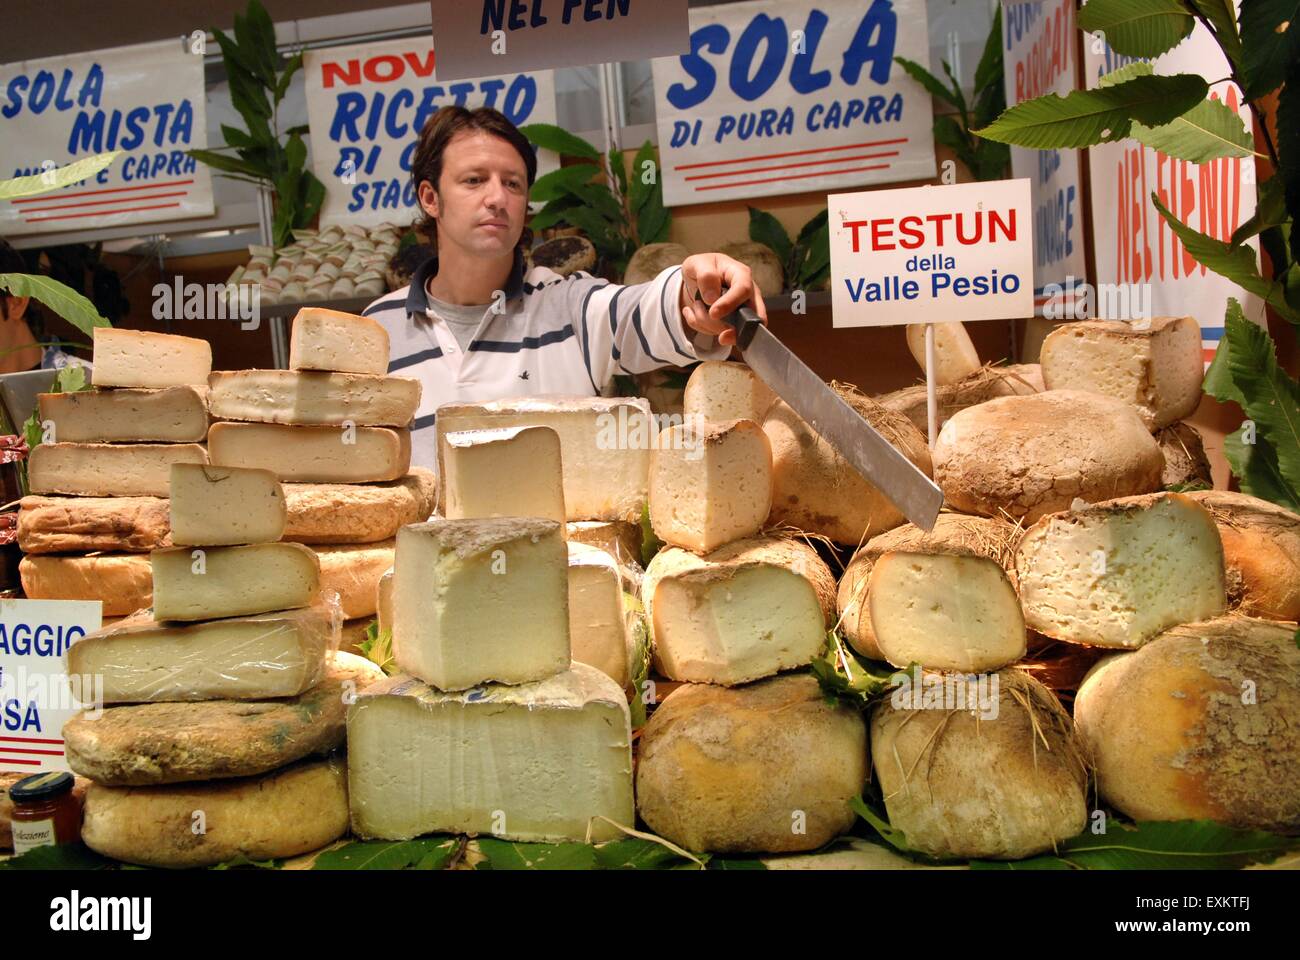 the truffle market in Alba, Piedmont region, Italy, sale of typical cheeses Stock Photo